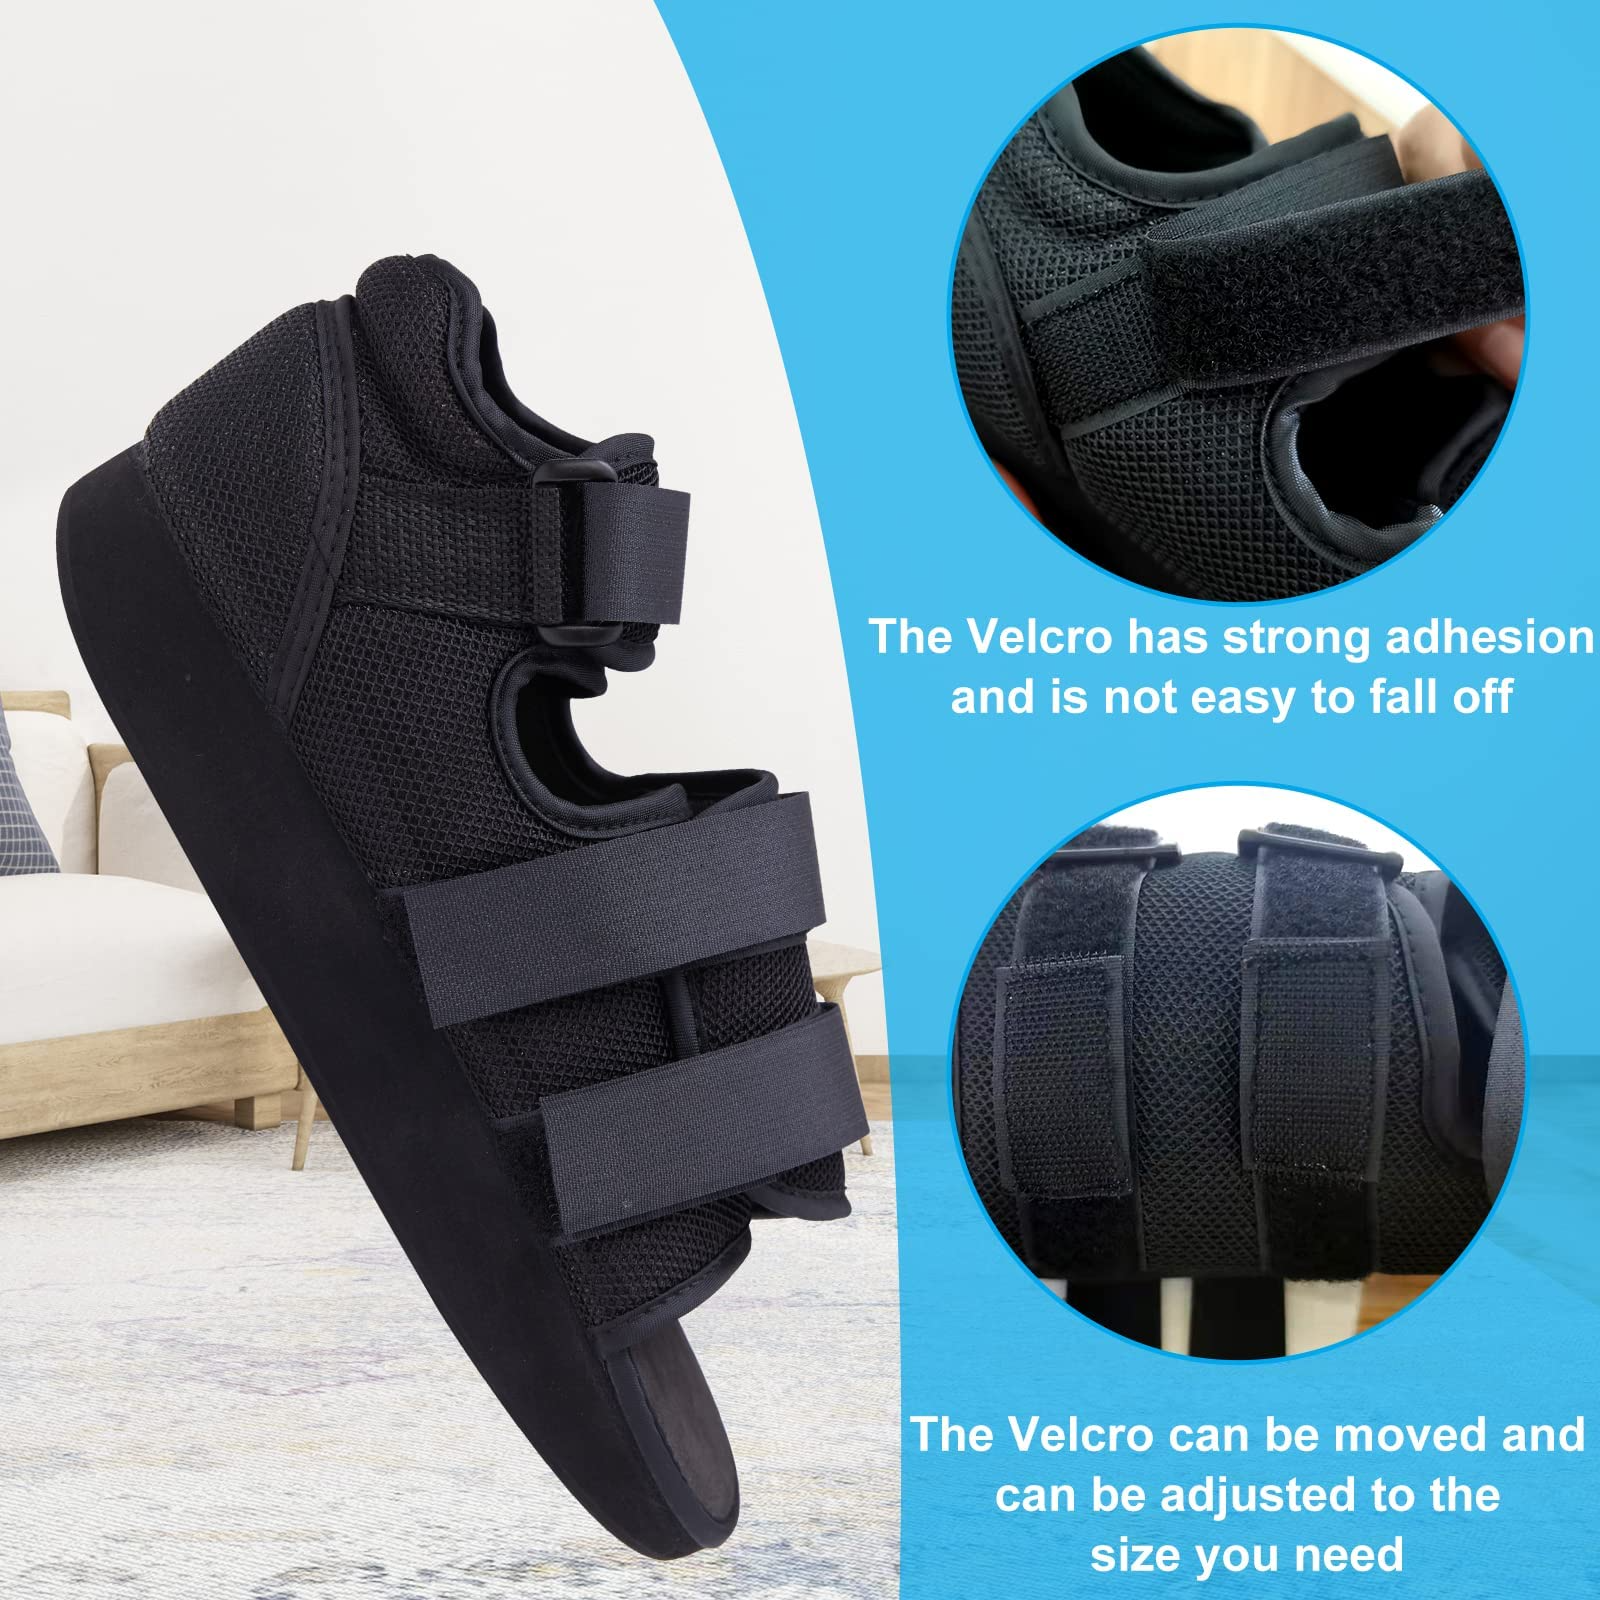 Post Op Shoe - Lightweight Medical Walking Shoes with Adjustable Strap - Orthopedic Recovery Cast Shoe for Post Surgery, Fractured Foot, Injured Toes, Stress Fracture, Sprains - Left or Right Foot - image 3 of 7